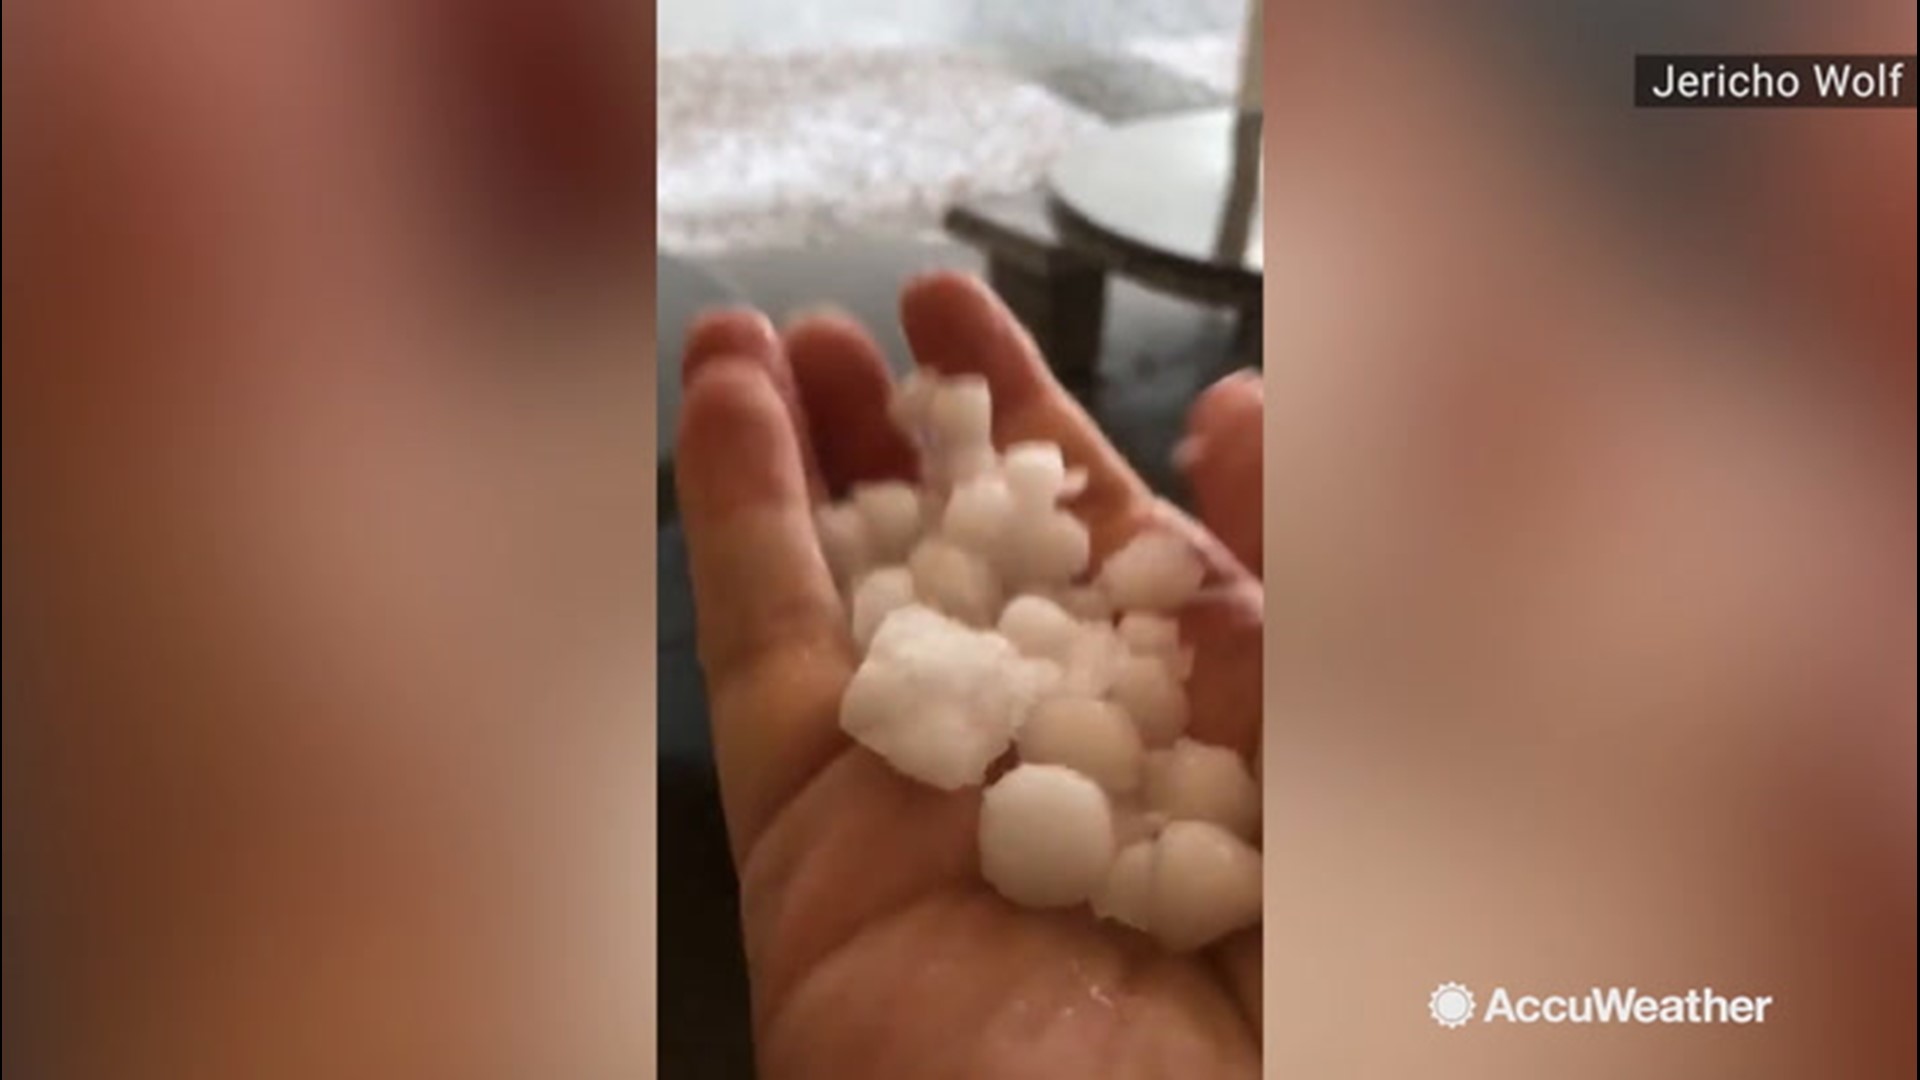 The Phoenix area in Arizona received a bombardment of hail on Dec. 9.